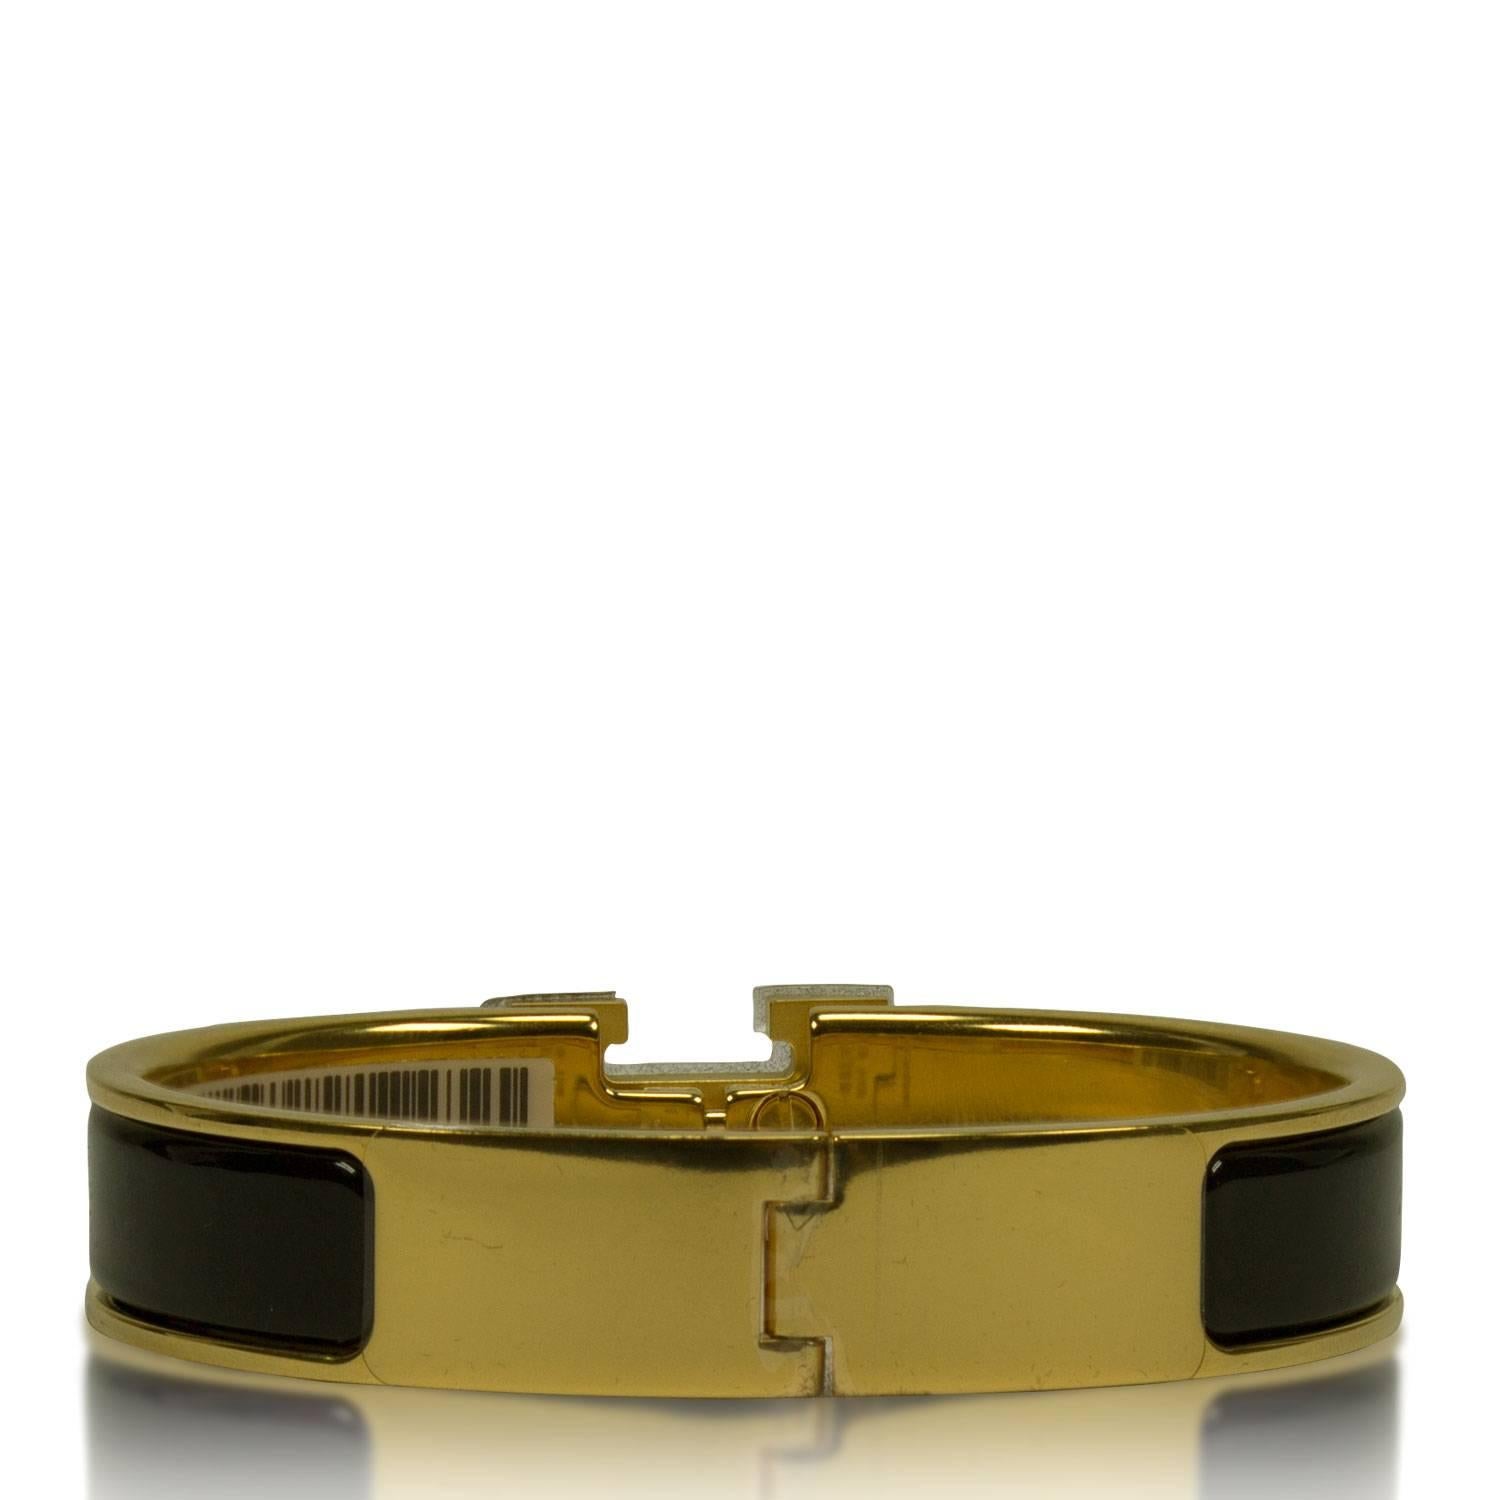 Hermes Bracelet Clic Clac H Gold Enamel Black Color PM Heigth 2016 In New Condition For Sale In Miami, FL